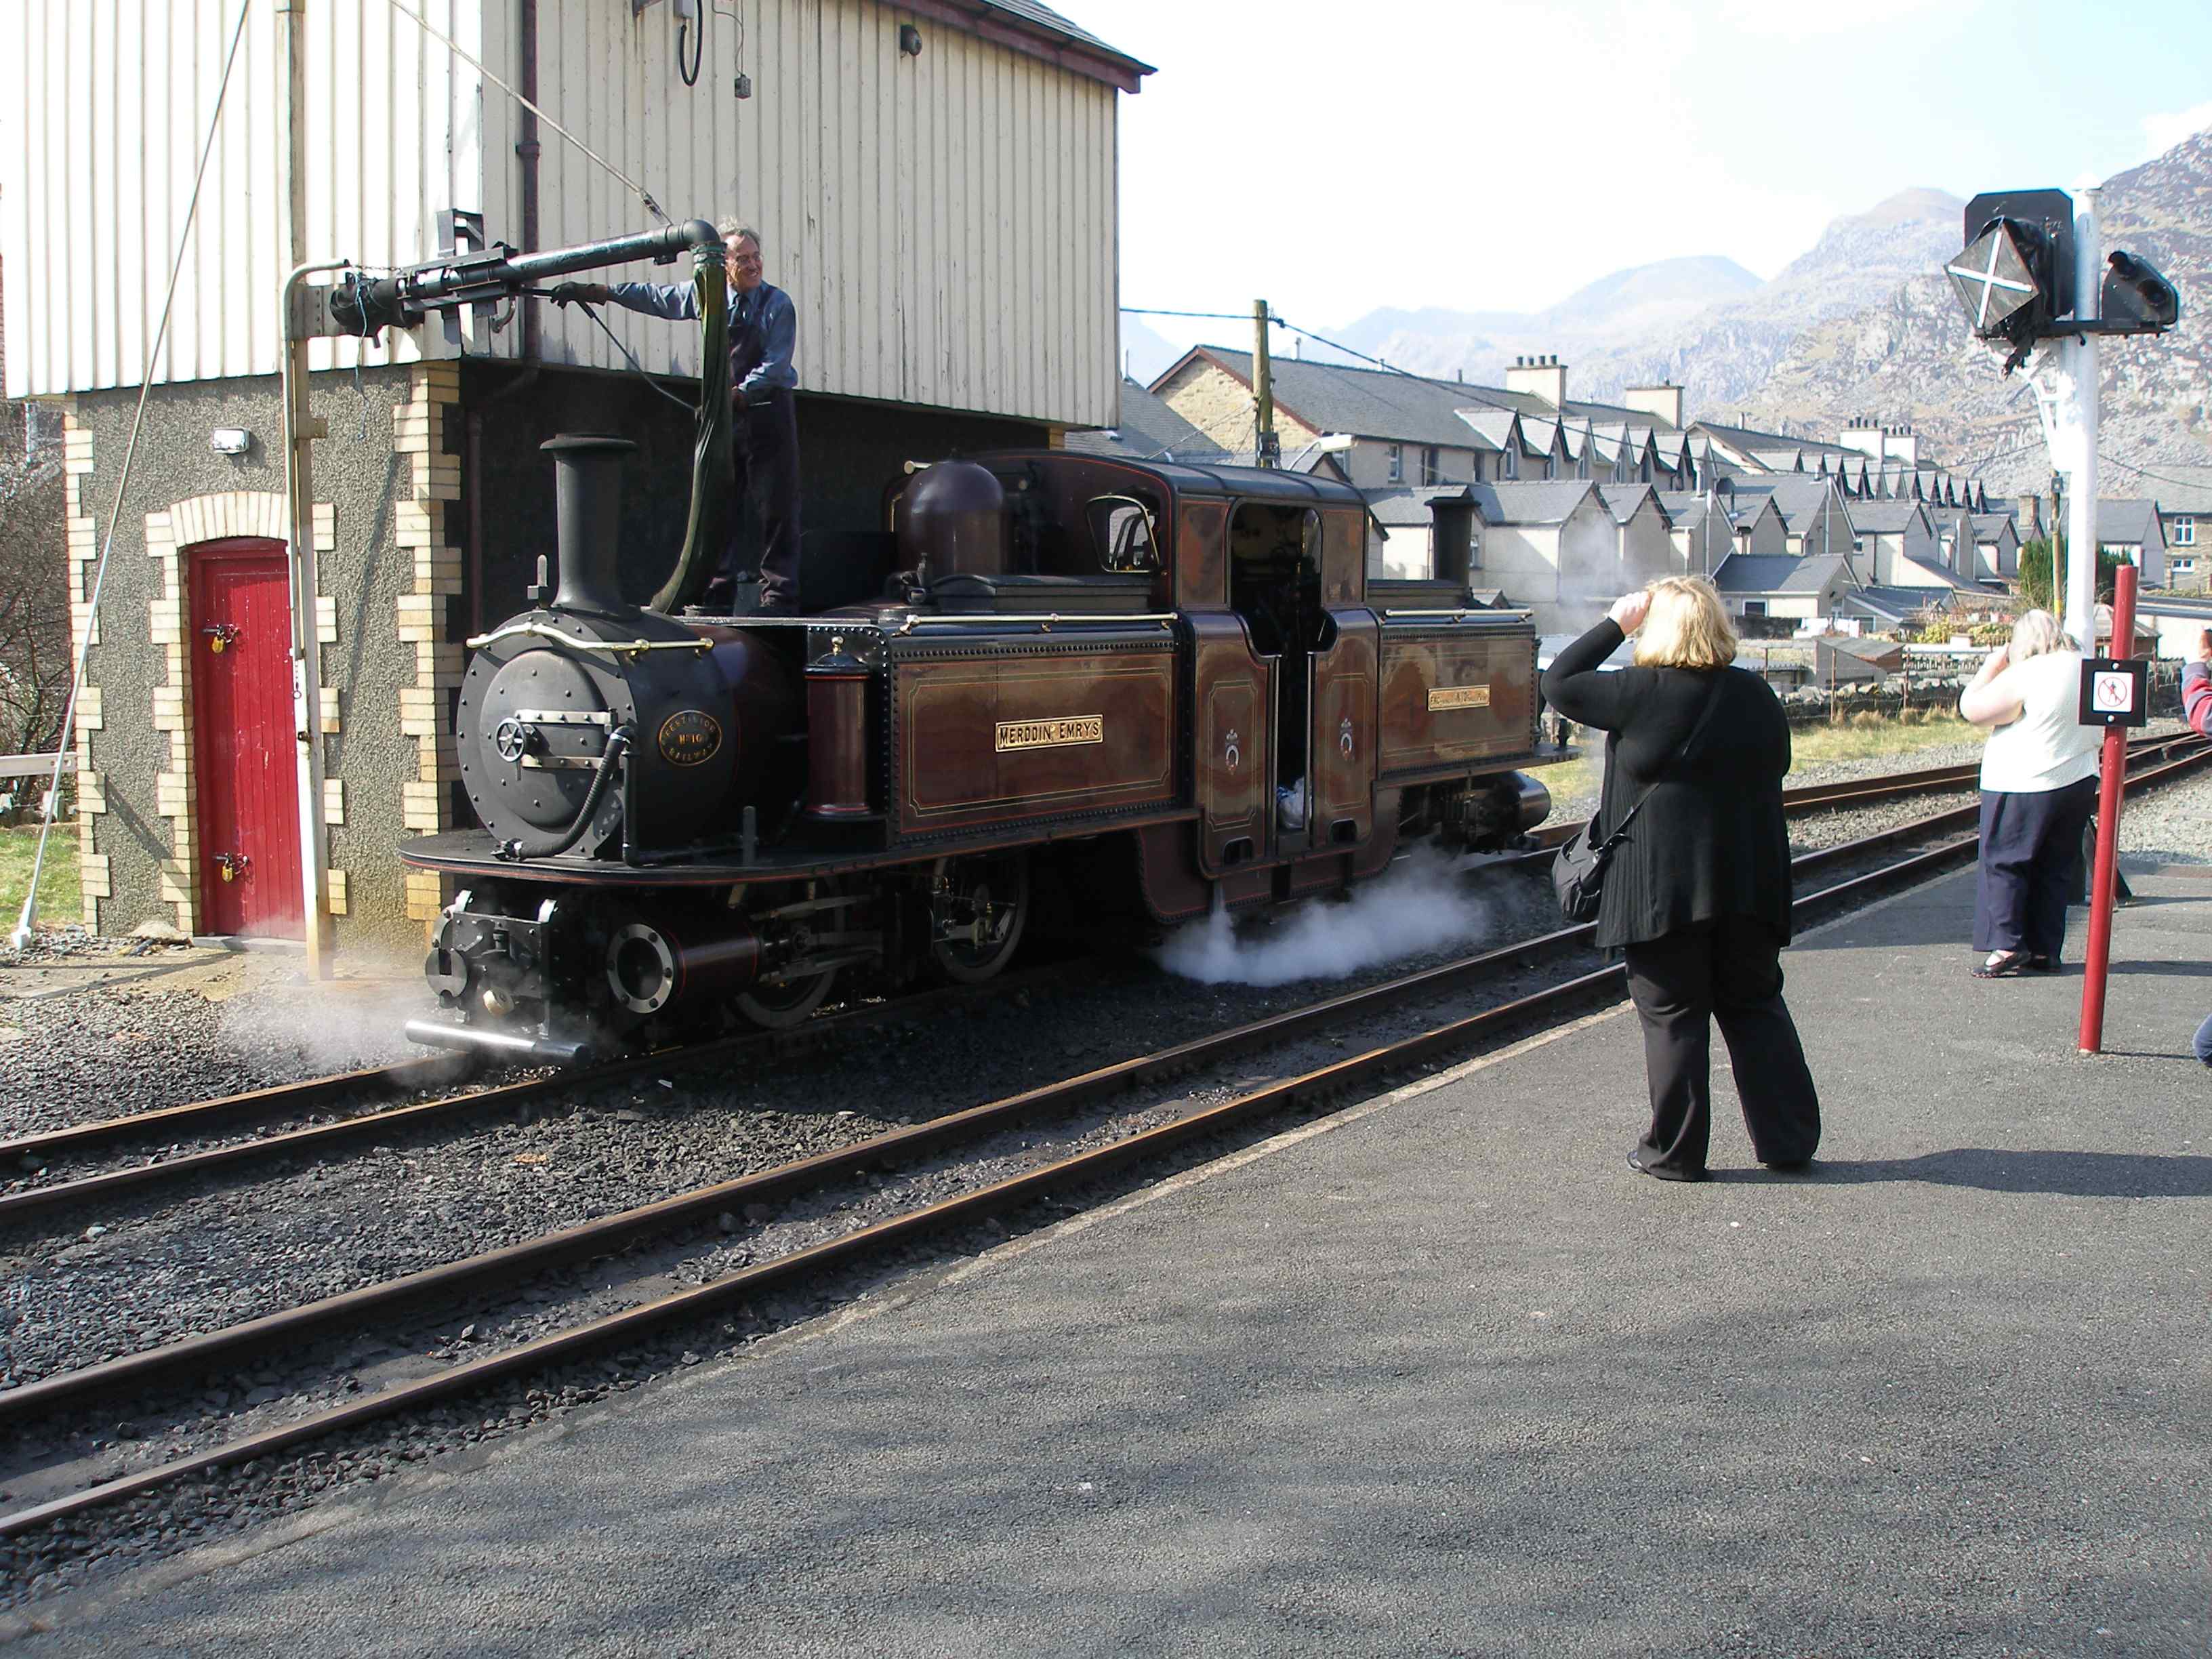 'Merddin Emrys' takes water at Blaenau Ffestiniog. Note the wooden cladding to protect the tank at this exposed location.